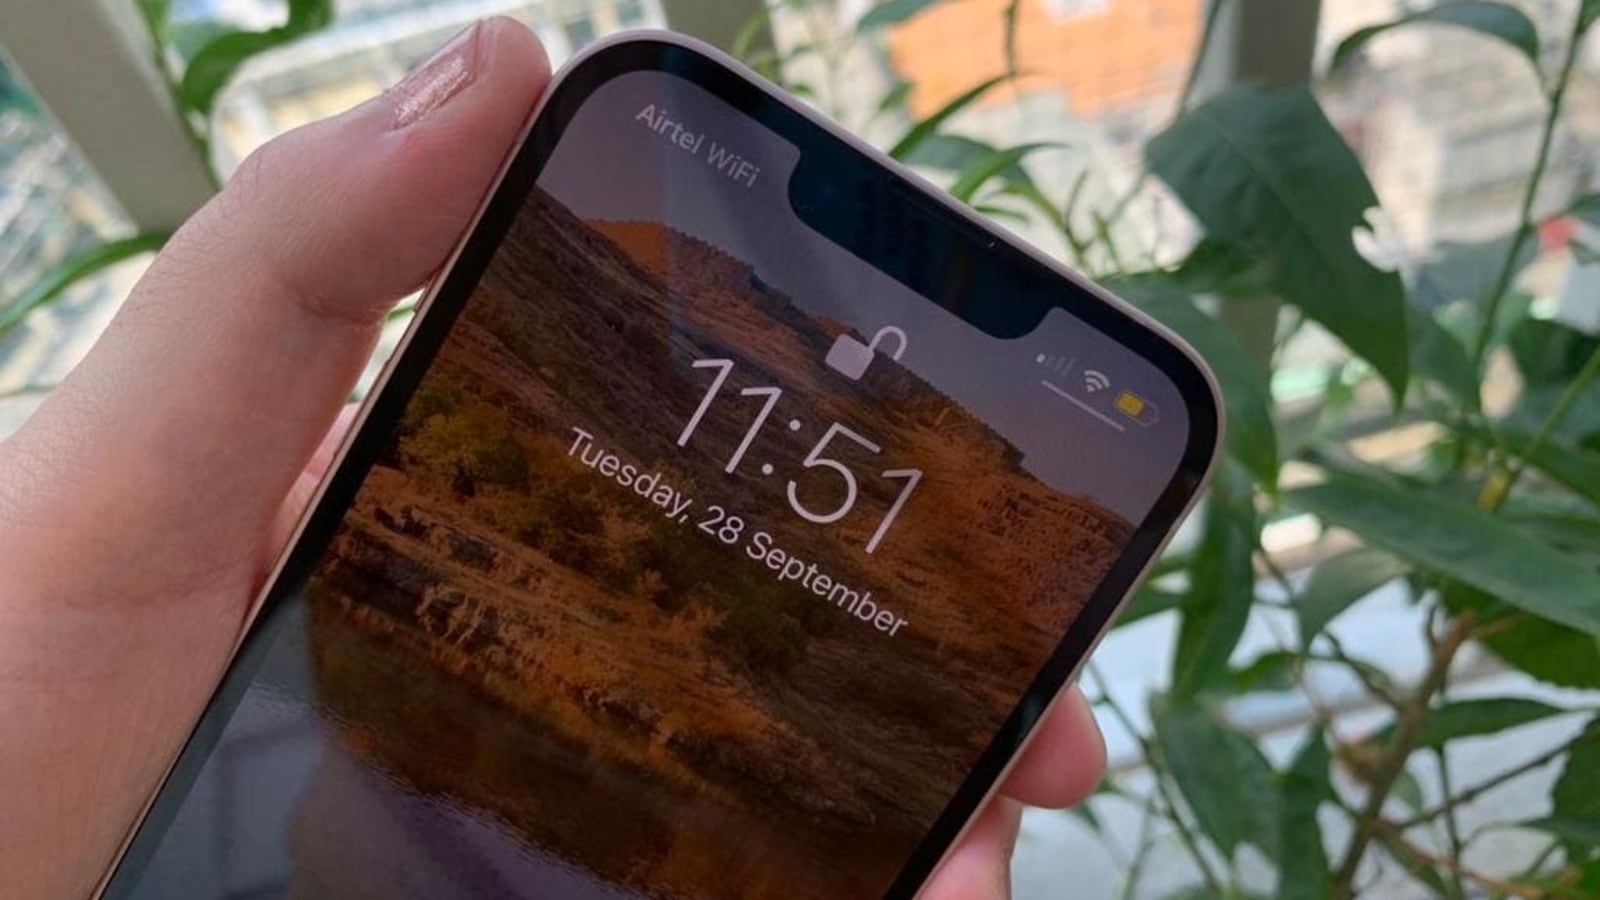 iPhone 11 doubters reconsider: 'Did you say it comes in PURPLE?!?' - CNET